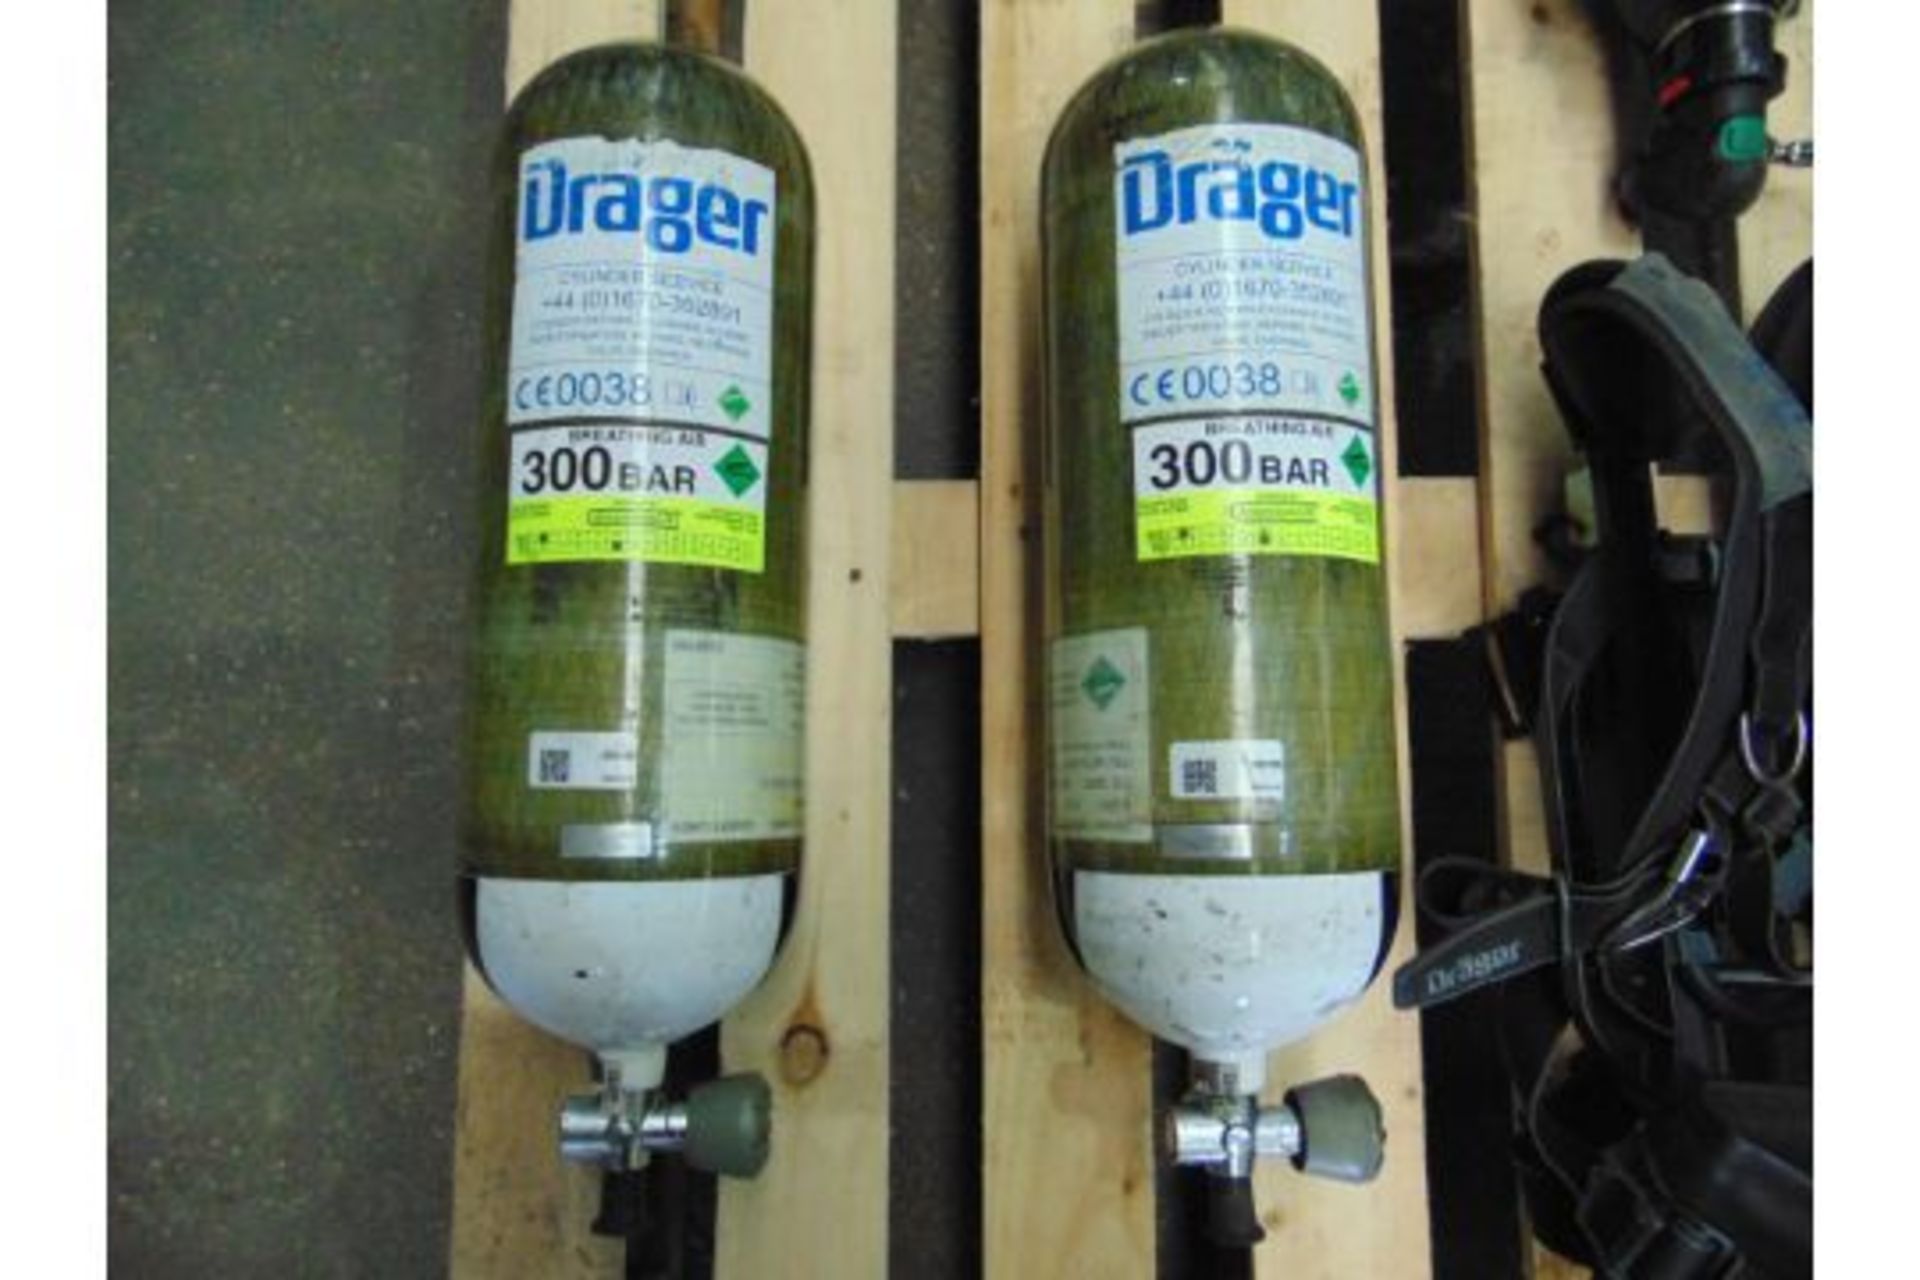 Drager PSS 7000 Self Contained Breathing Apparatus w/ 2 x Drager 300 Bar Air Cylinders - Image 2 of 23